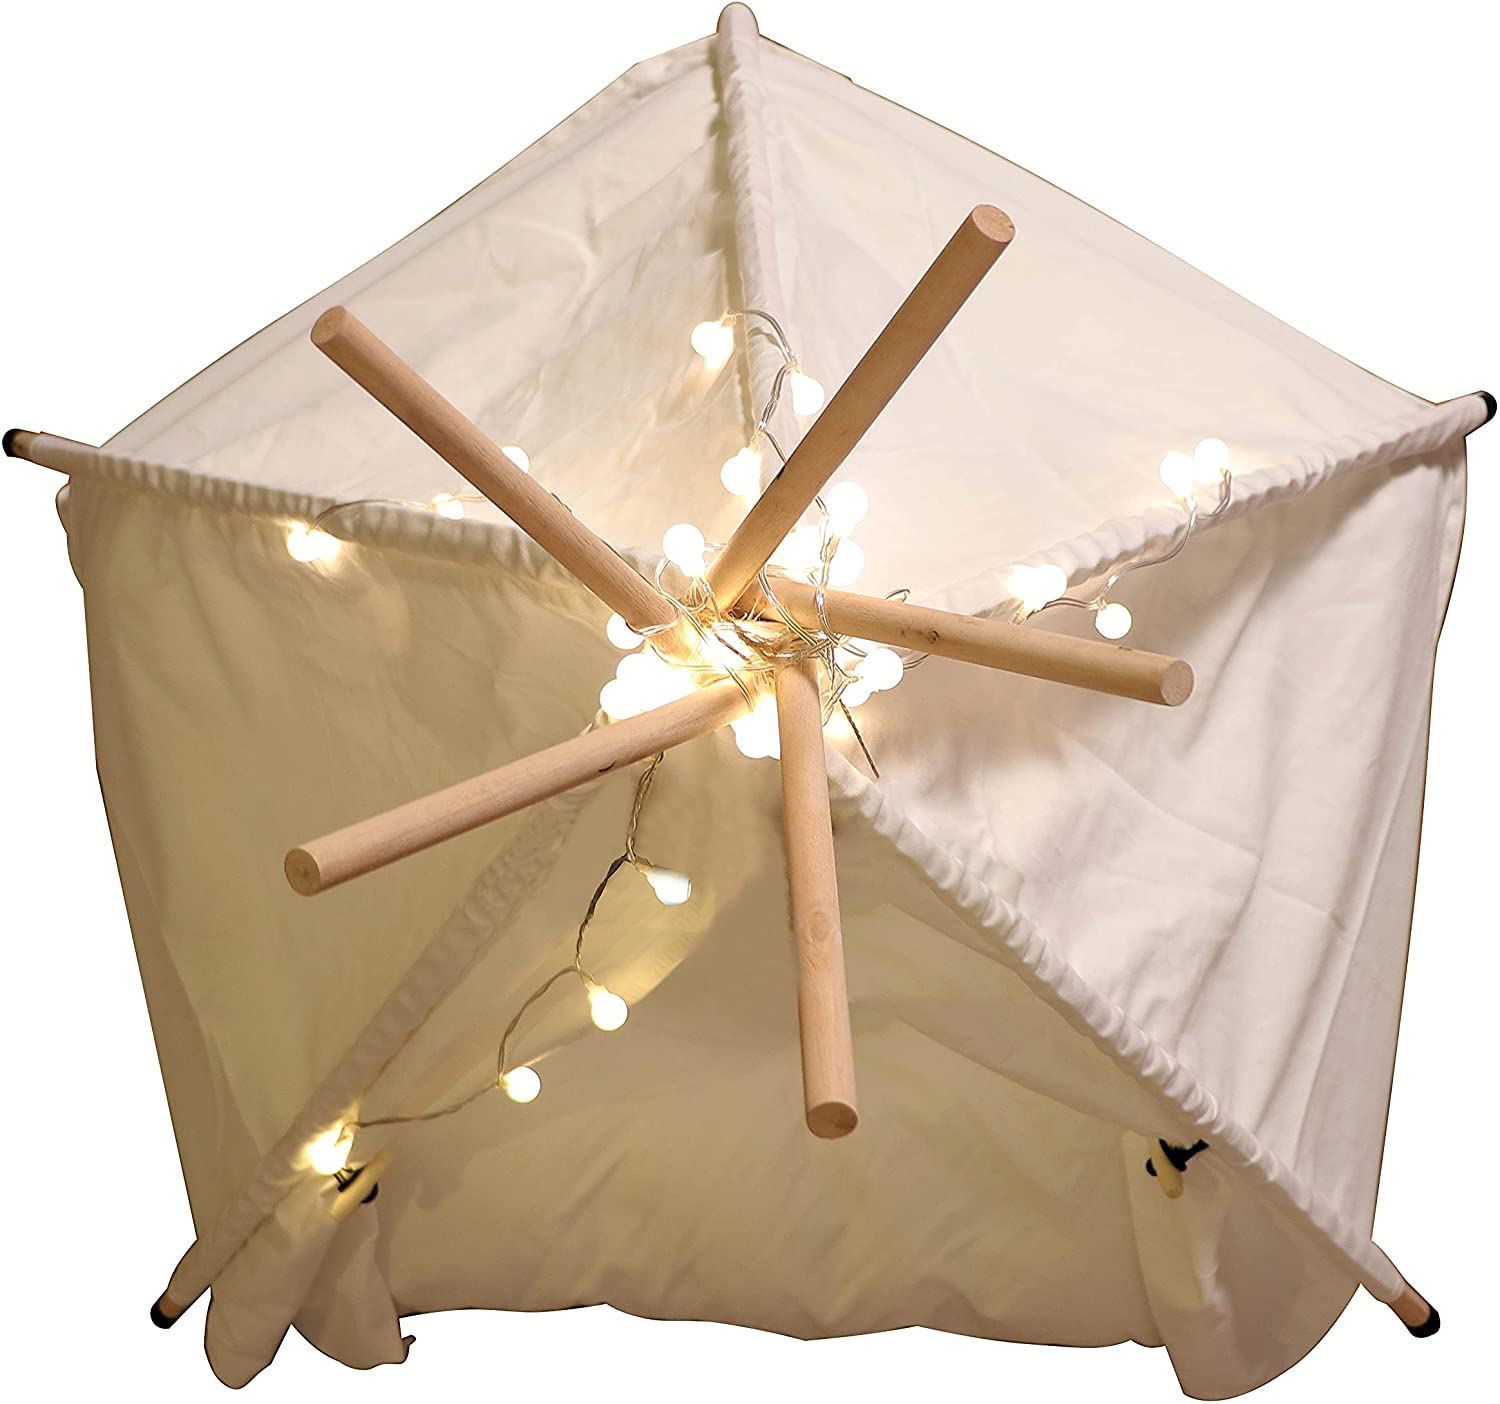 Peyamii Pet Tent Portable Puppy Sweet Bed Suitable for Small Dogs or Cats Natural Cotton Canvas with Cushions Lights Can Wash Kennels 20X20X24 Inches Animals & Pet Supplies > Pet Supplies > Dog Supplies > Dog Houses peyamii   